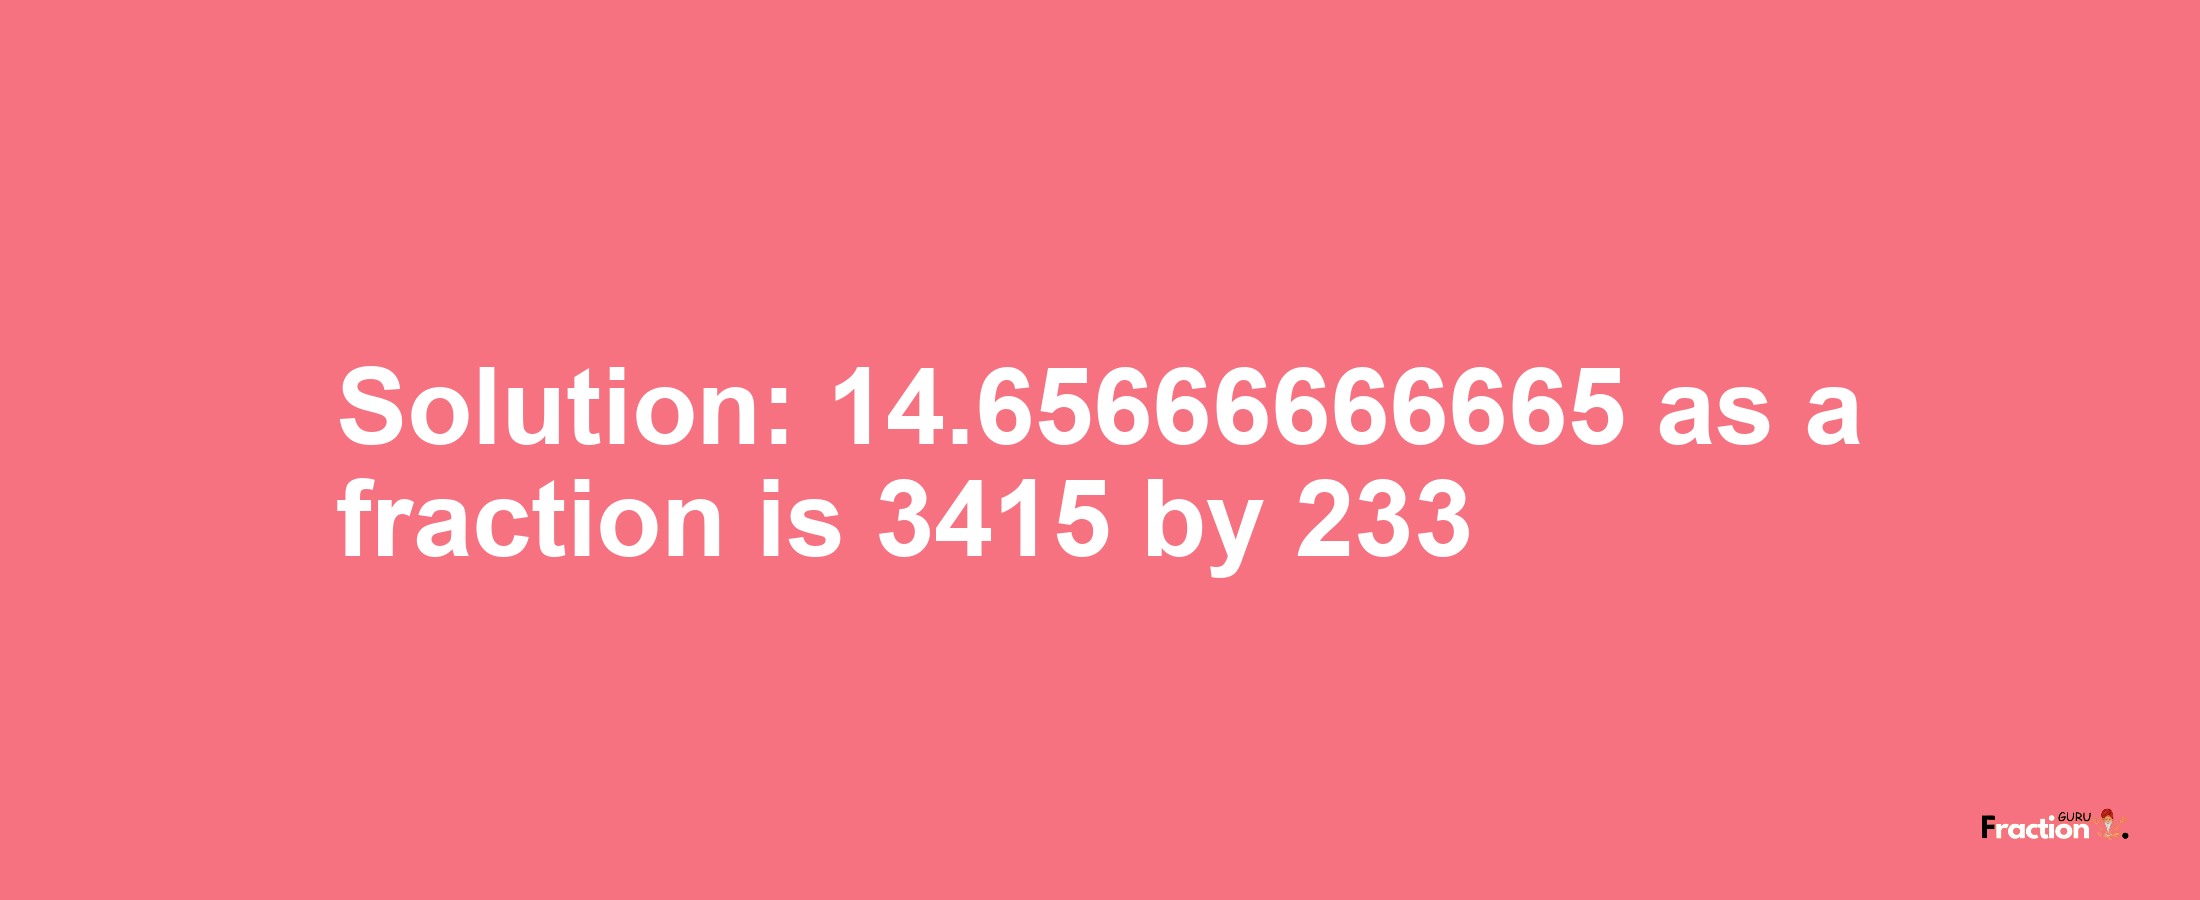 Solution:14.65666666665 as a fraction is 3415/233